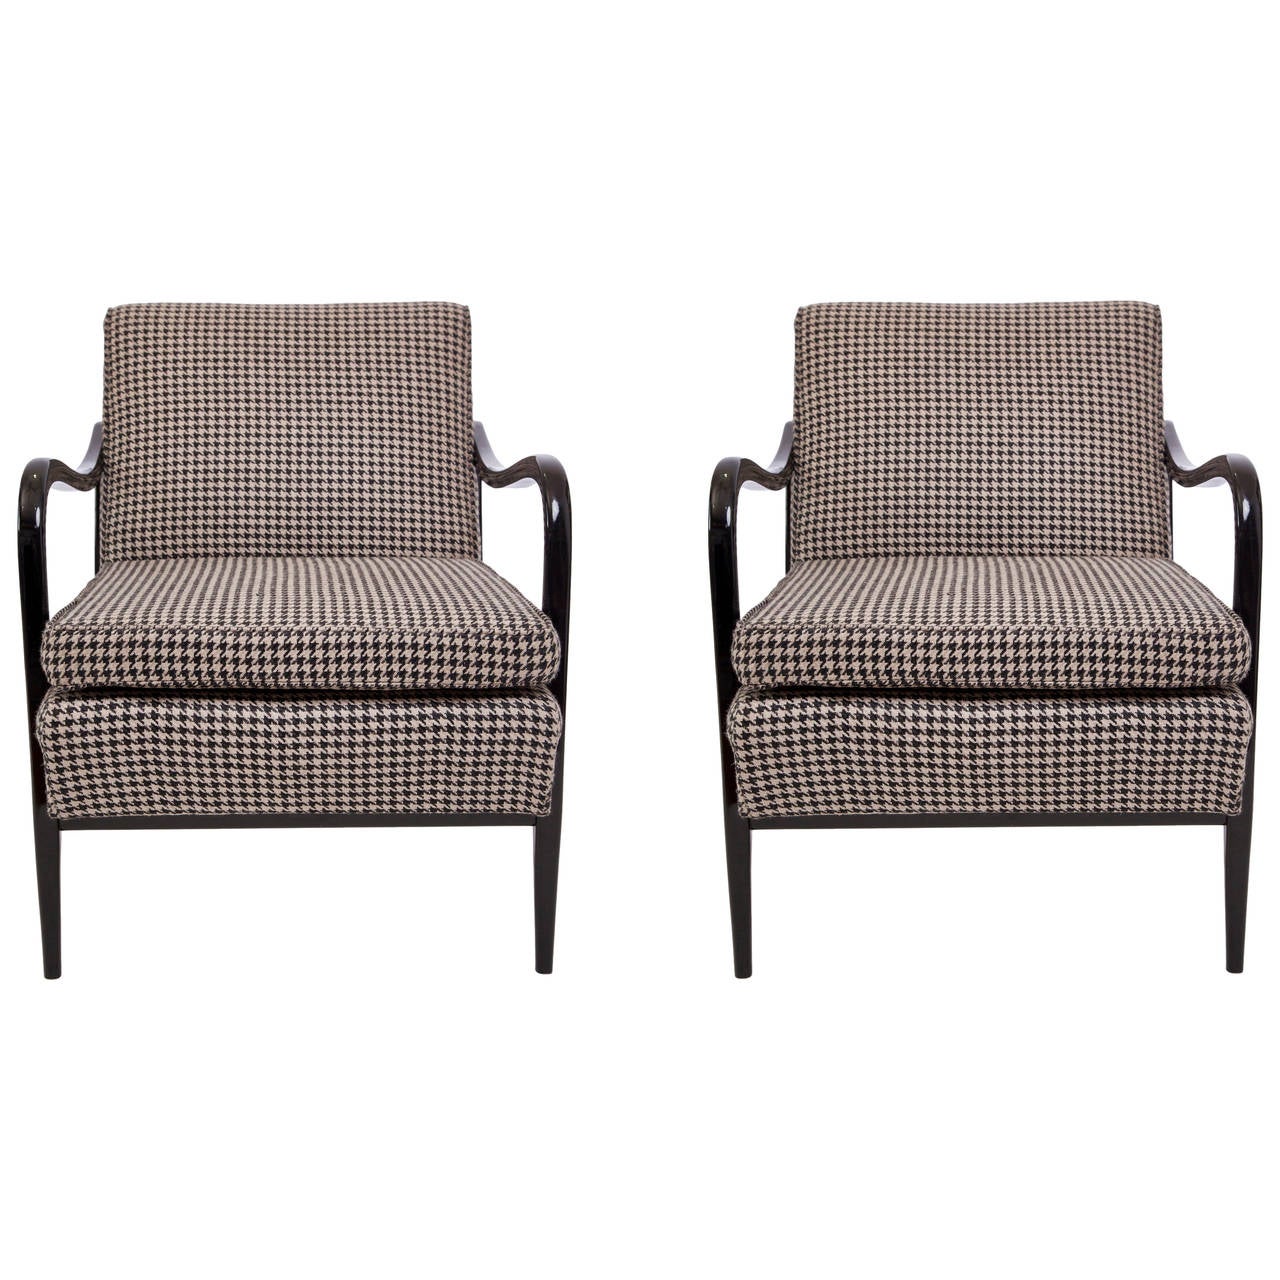 A vintage pair of modernistic armchairs, produced, circa 1950s, with rounded waterfall arms in ebonized wood on tapering legs, the cushioned back and seat upholstered in fabric with black and white hounds-tooth patterns. Good vintage condition, with